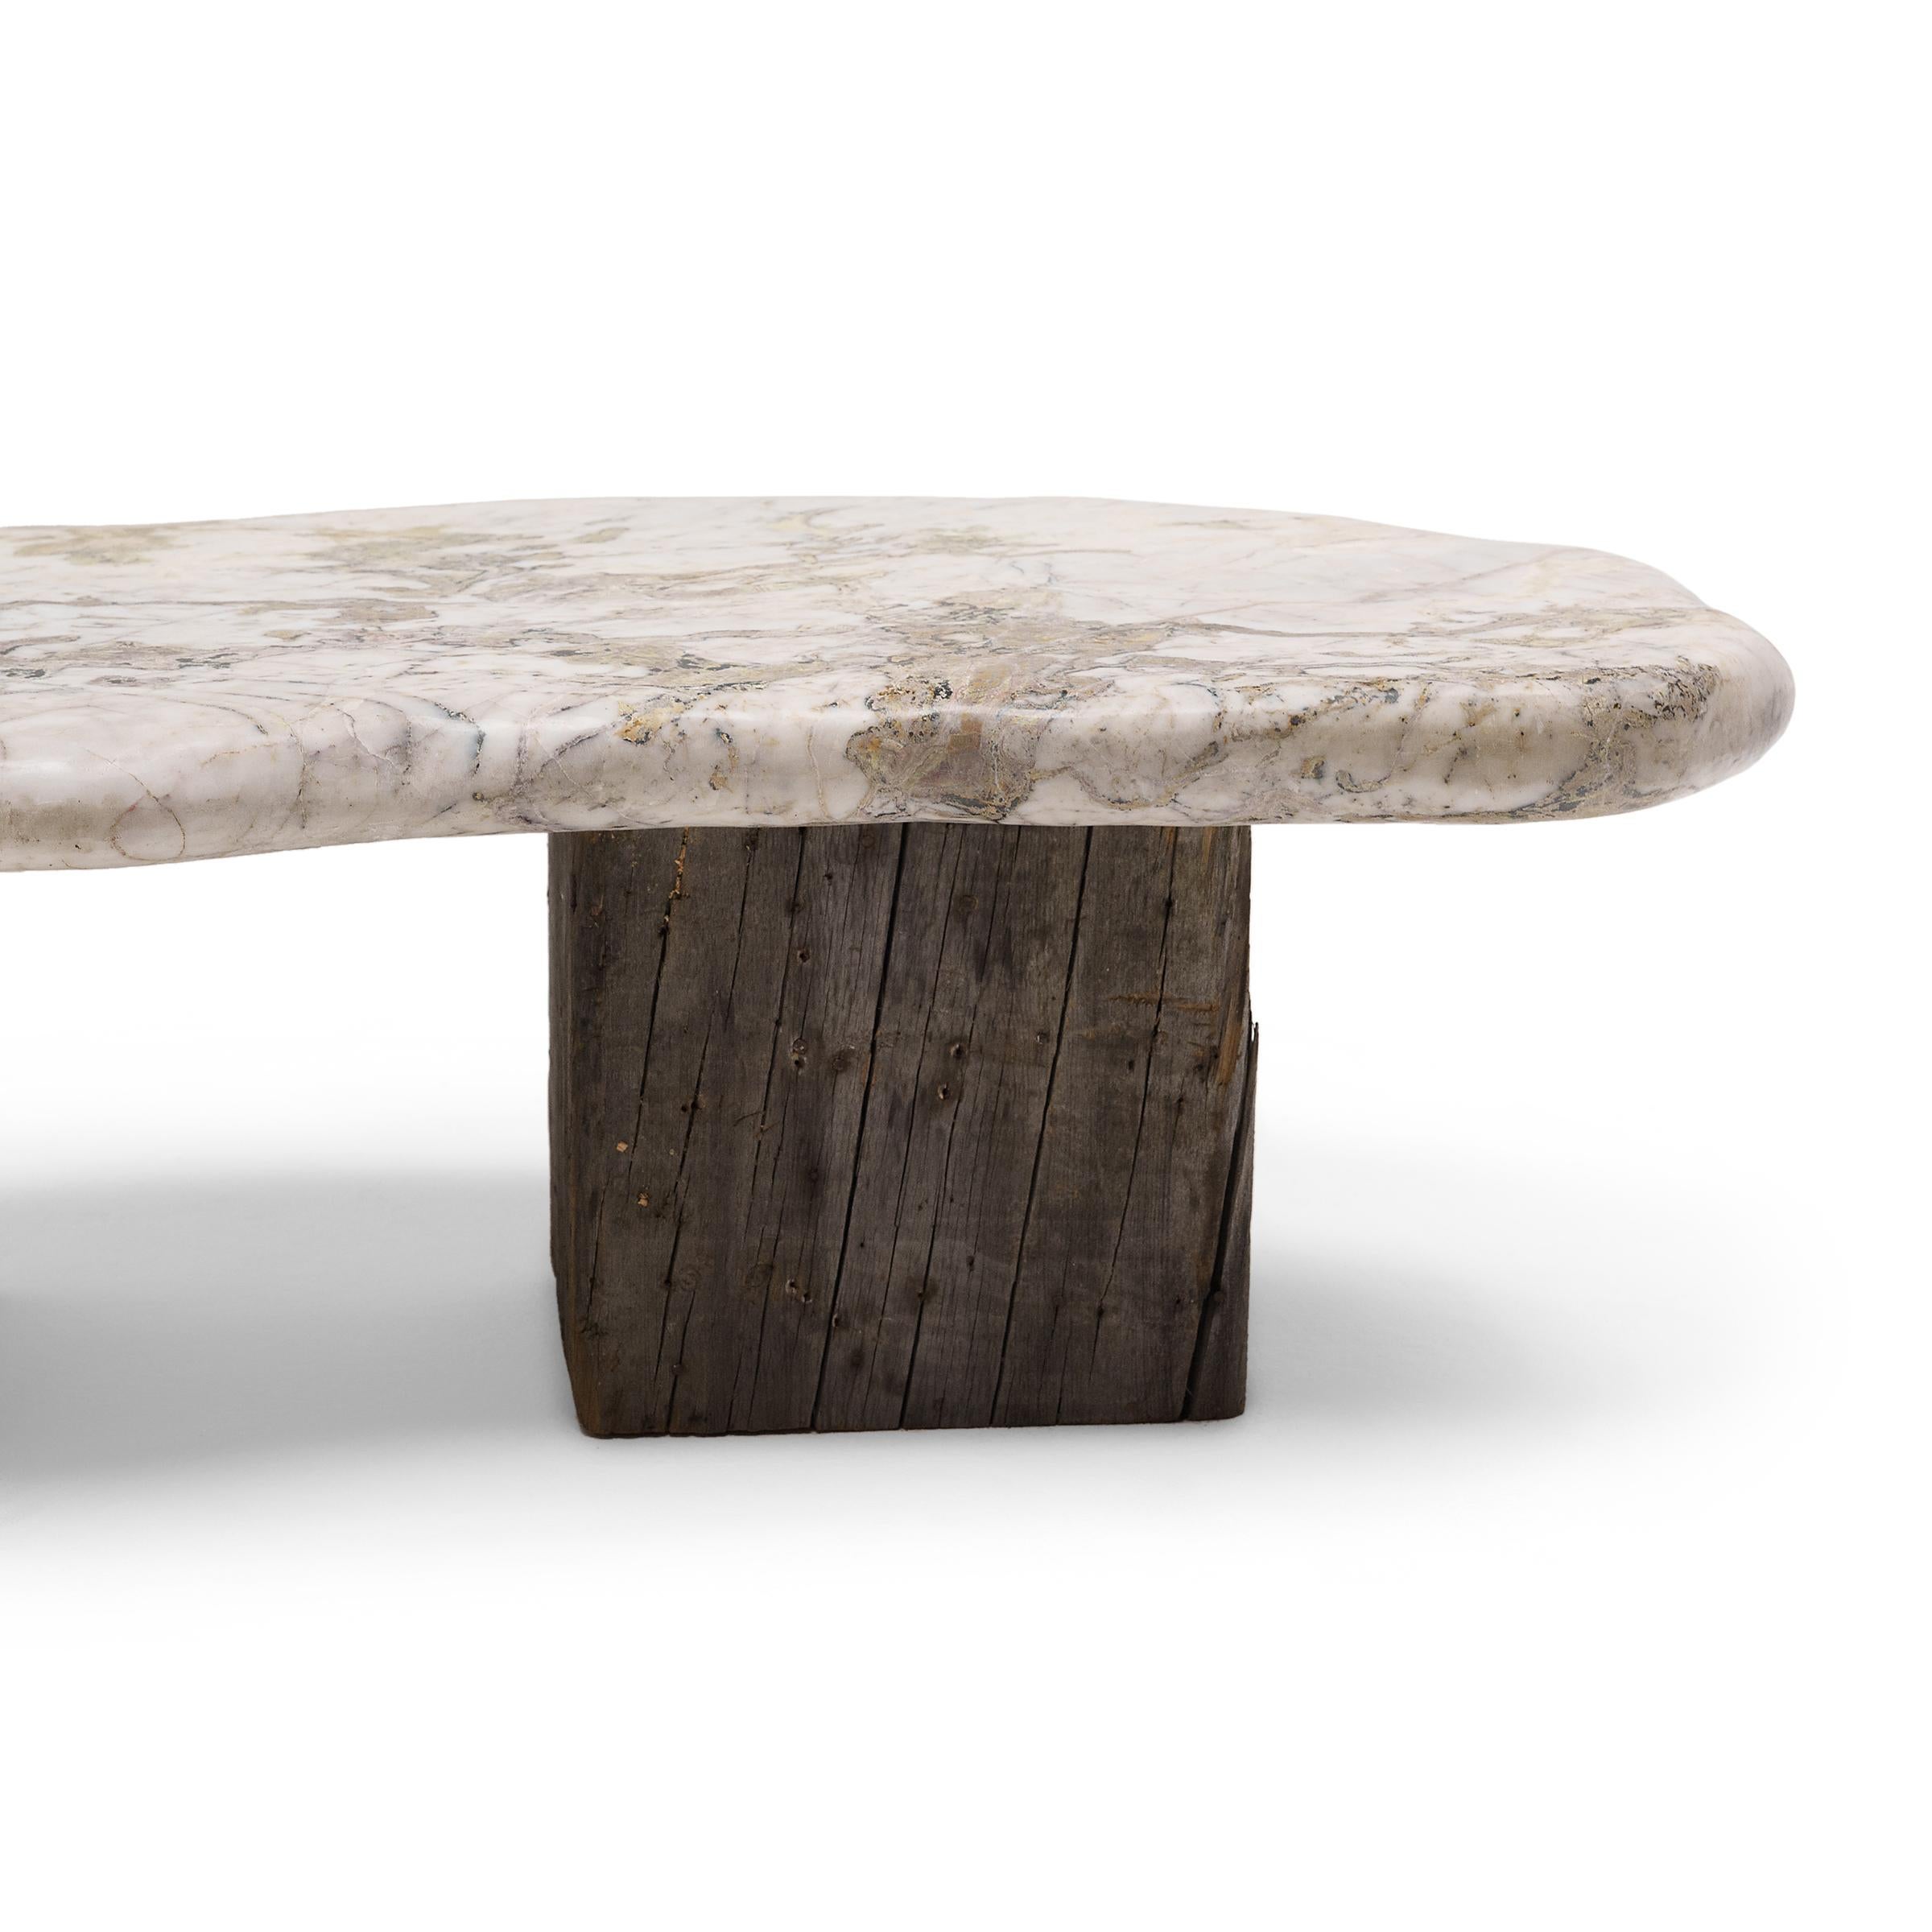 Contemporary Chinese Glacial Meditation Stone Table For Sale